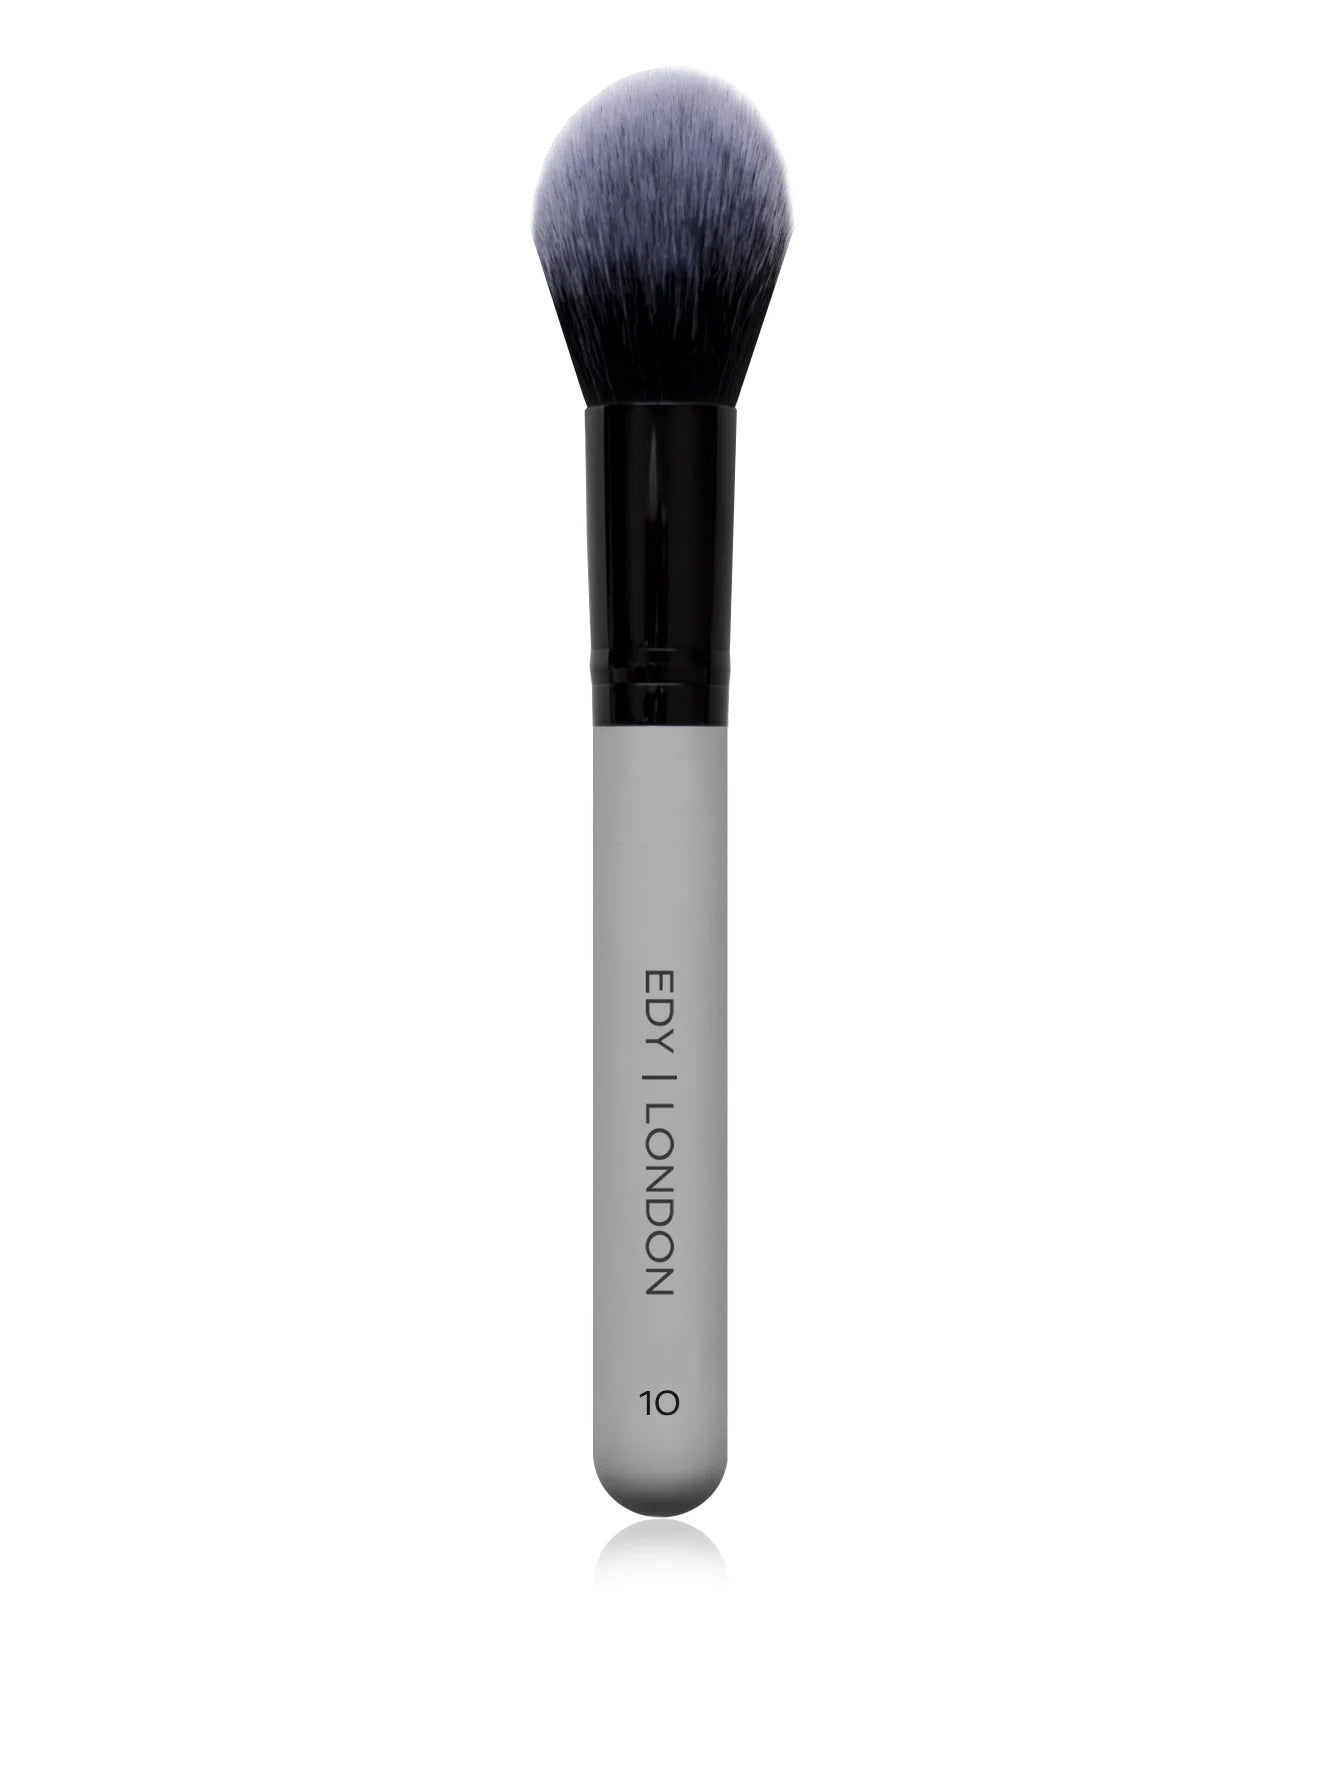 Tapered Face Brush 10 Make-up Brush EDY LONDON Cool Grey   - EDY LONDON PRODUCTS UK - The Best Makeup Brushes - shop.edy.london